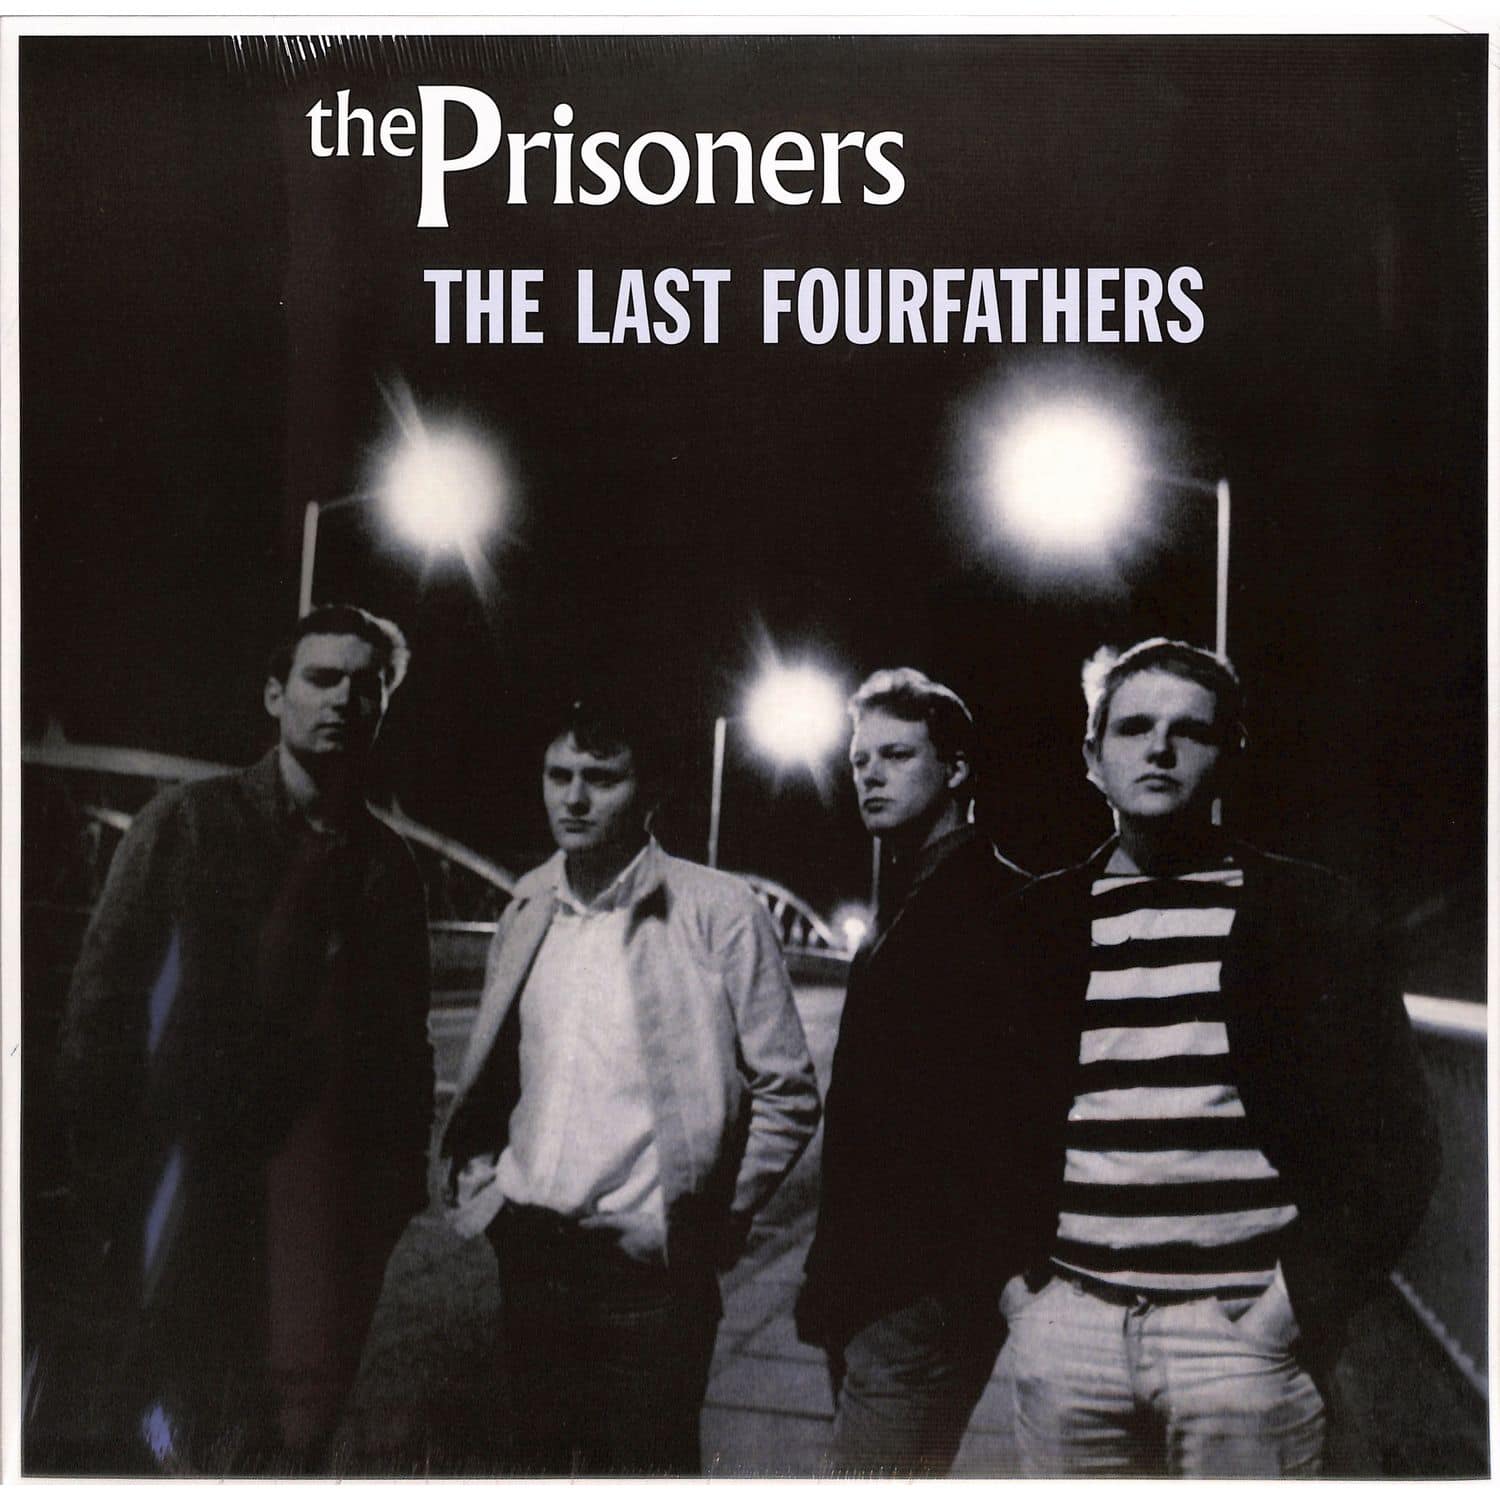 The Prisoners - THE LAST FOURFATHERS 